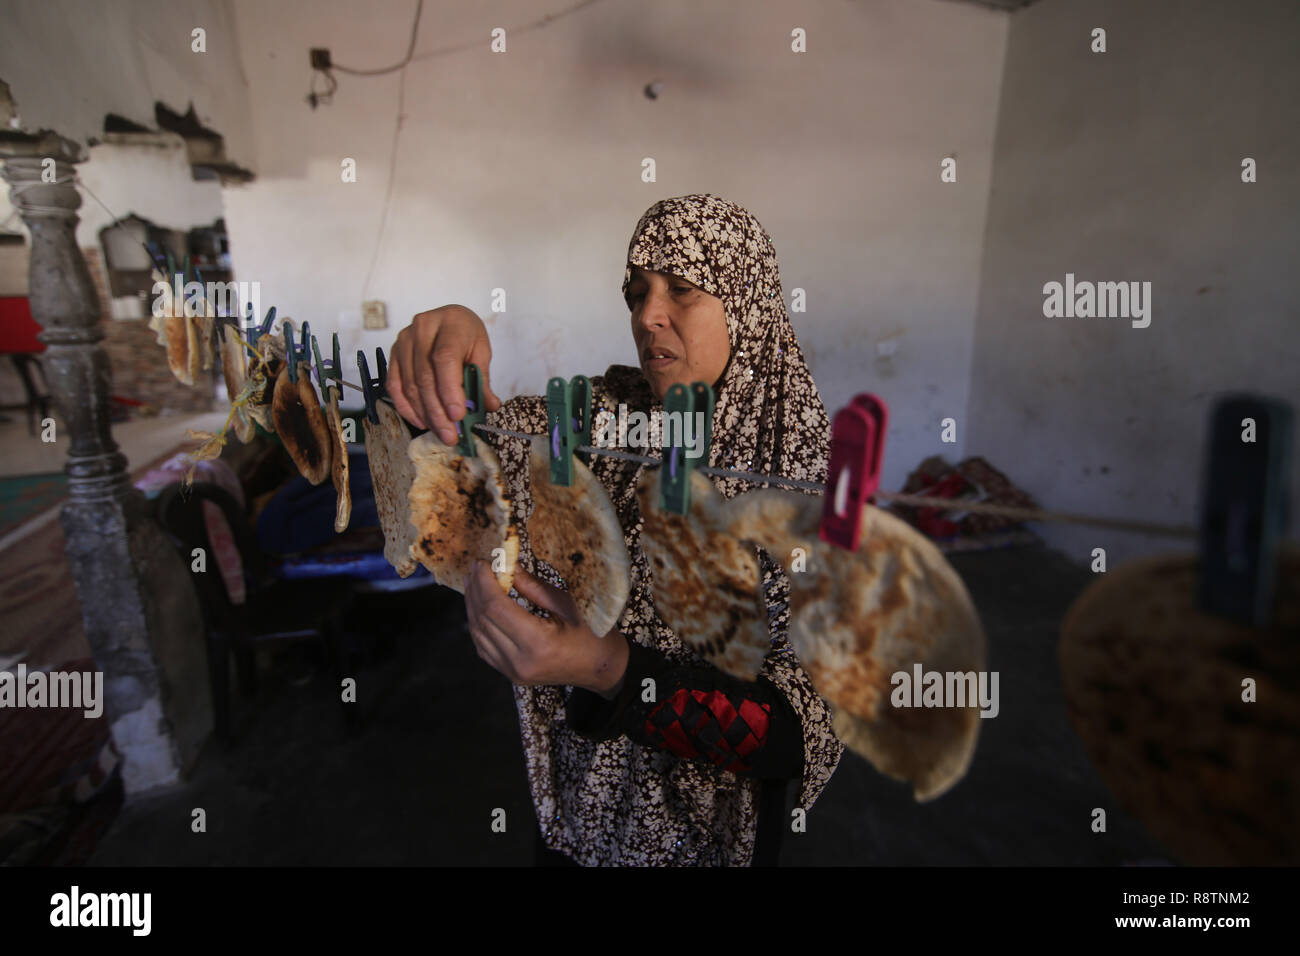 Gaza. 18th Dec, 2018. Palestinian woman Fayrouz al-A'raj, 45, dries bread remains inside her house, in the southern Gaza Strip city of Khan Younis, on Dec. 18, 2018. Fayrouz al-A'raj sells bread remains to livestock owners to feed their animals. Credit: Khaled Omar/Xinhua/Alamy Live News Stock Photo